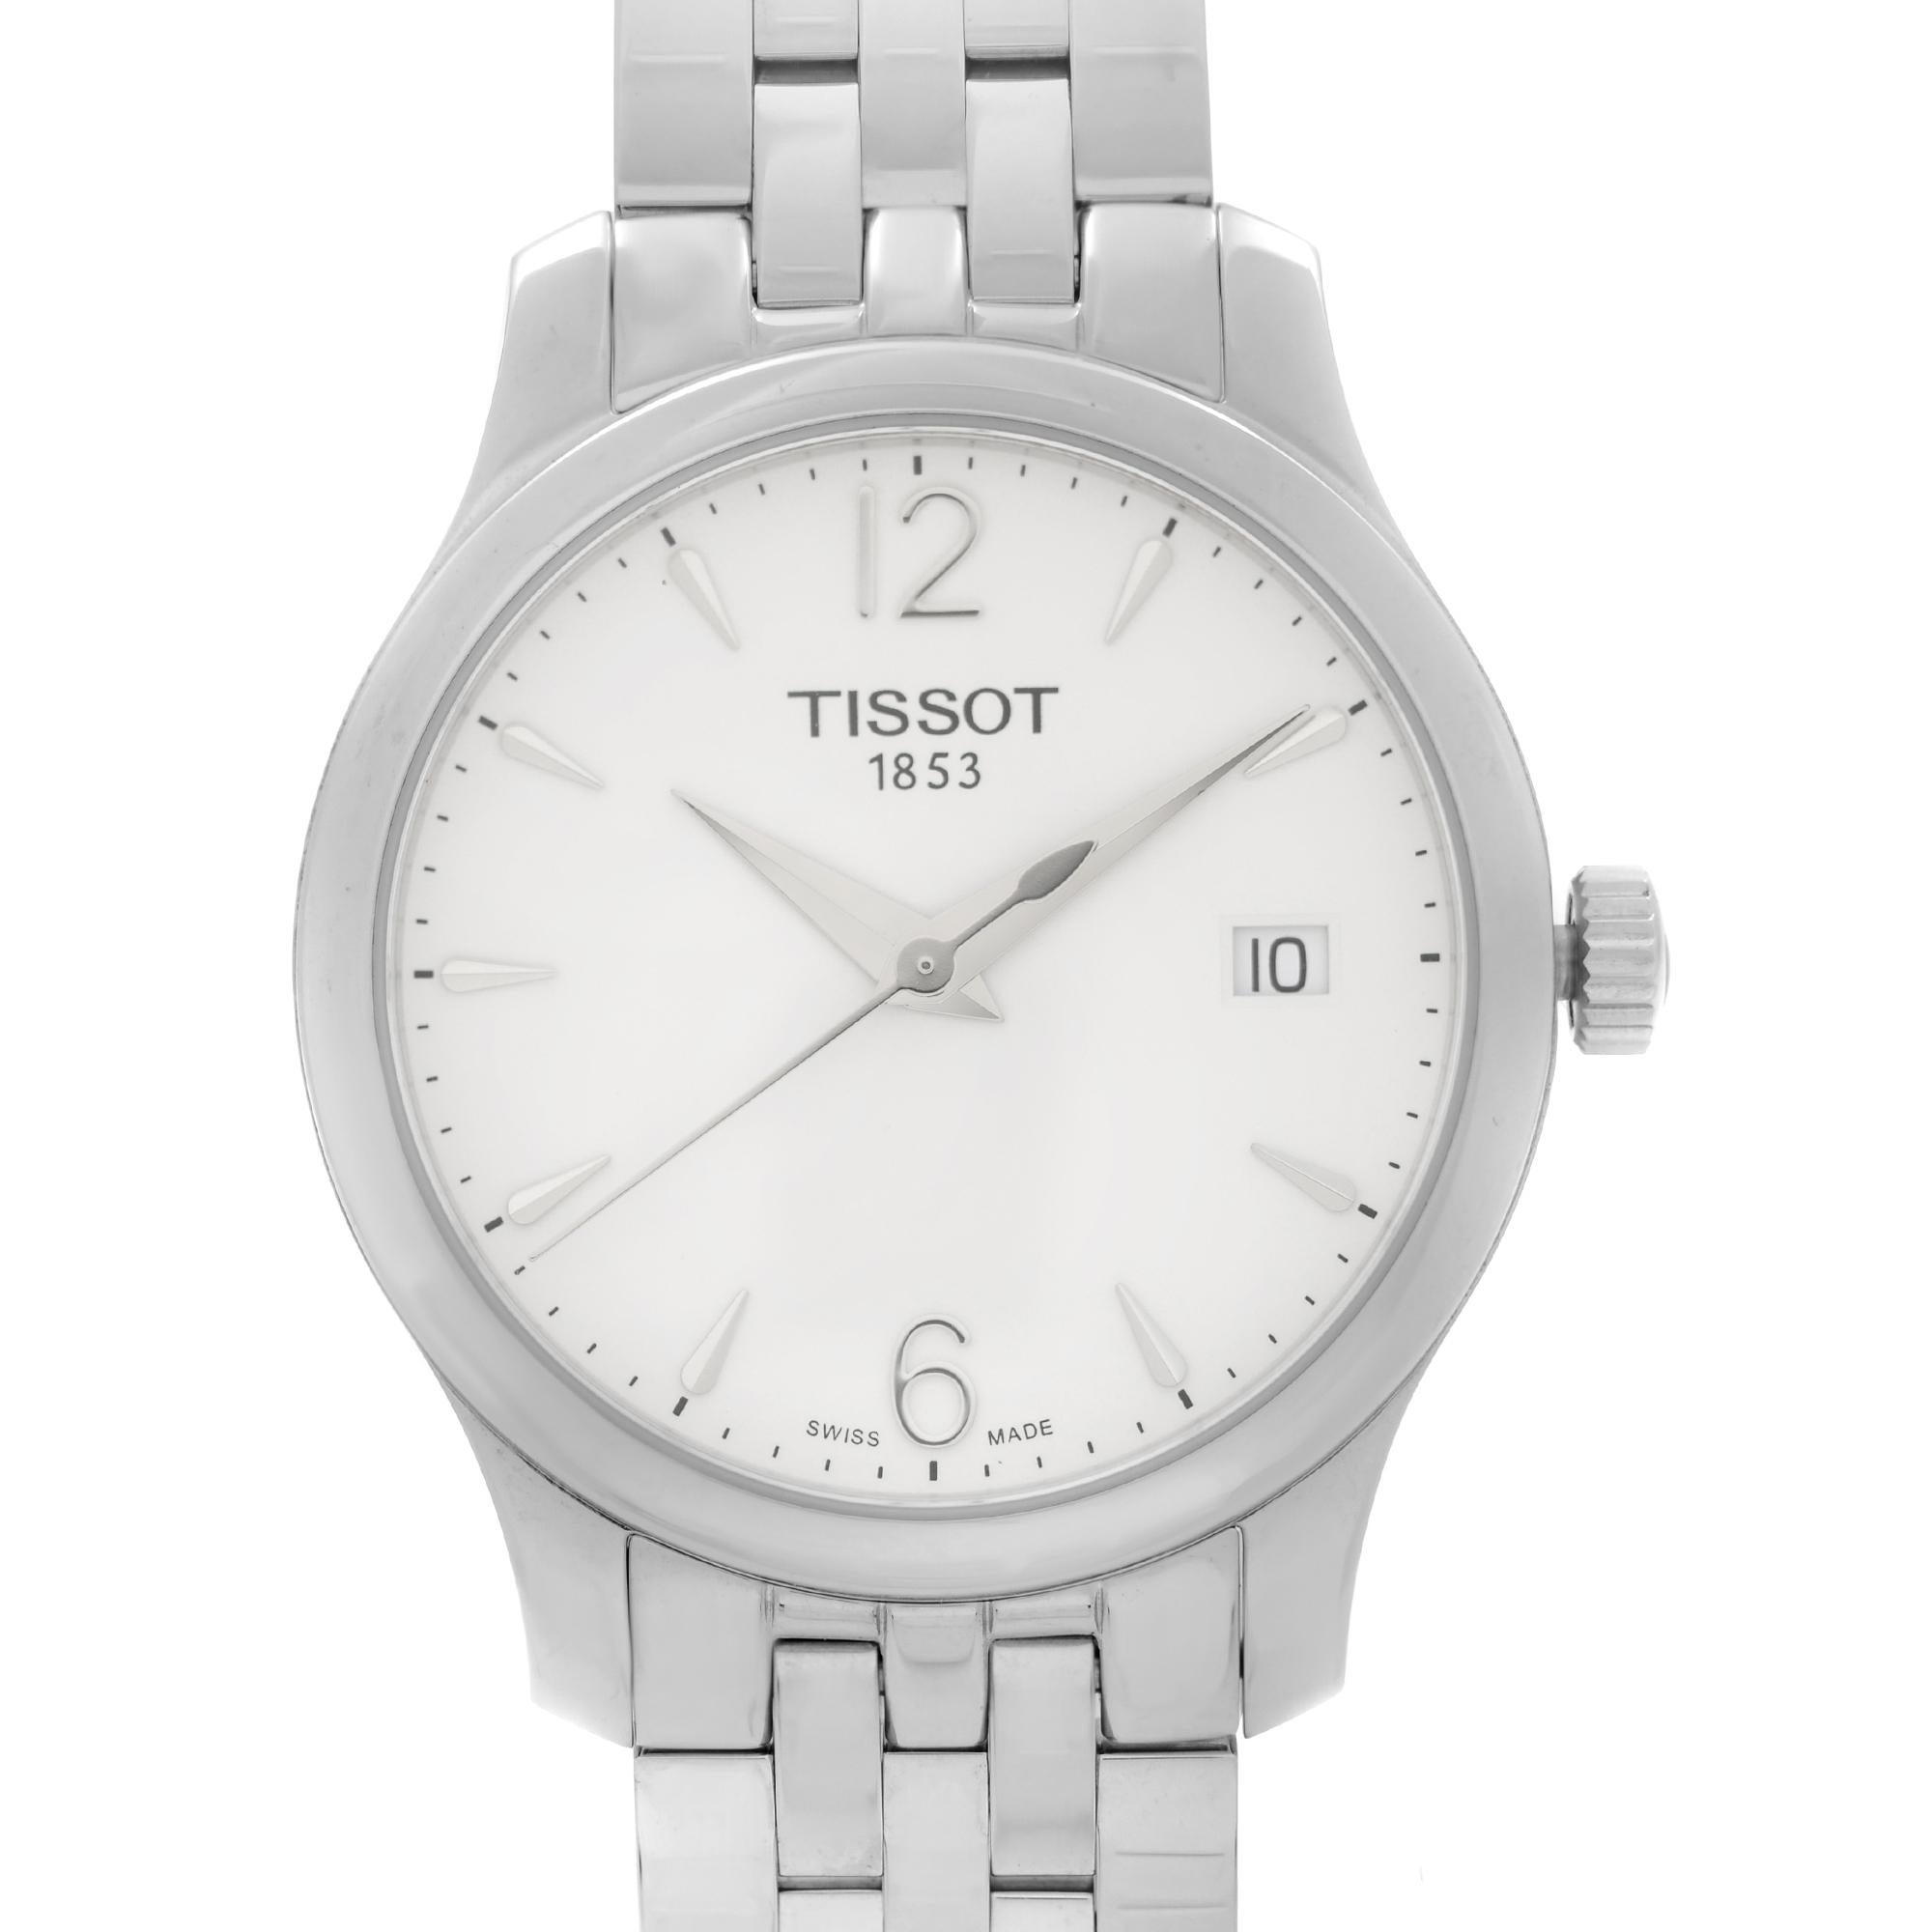 Display Model Tissot Tradition Stainless Steel Silver Dial Ladies Quartz Watch T063.210.11.037.00. This Beautiful Timepiece is Powered by Quartz (Battery) Movement and Features: Rounds Stainless Steel Case with a Stainless Steel Bracelet, Fixed